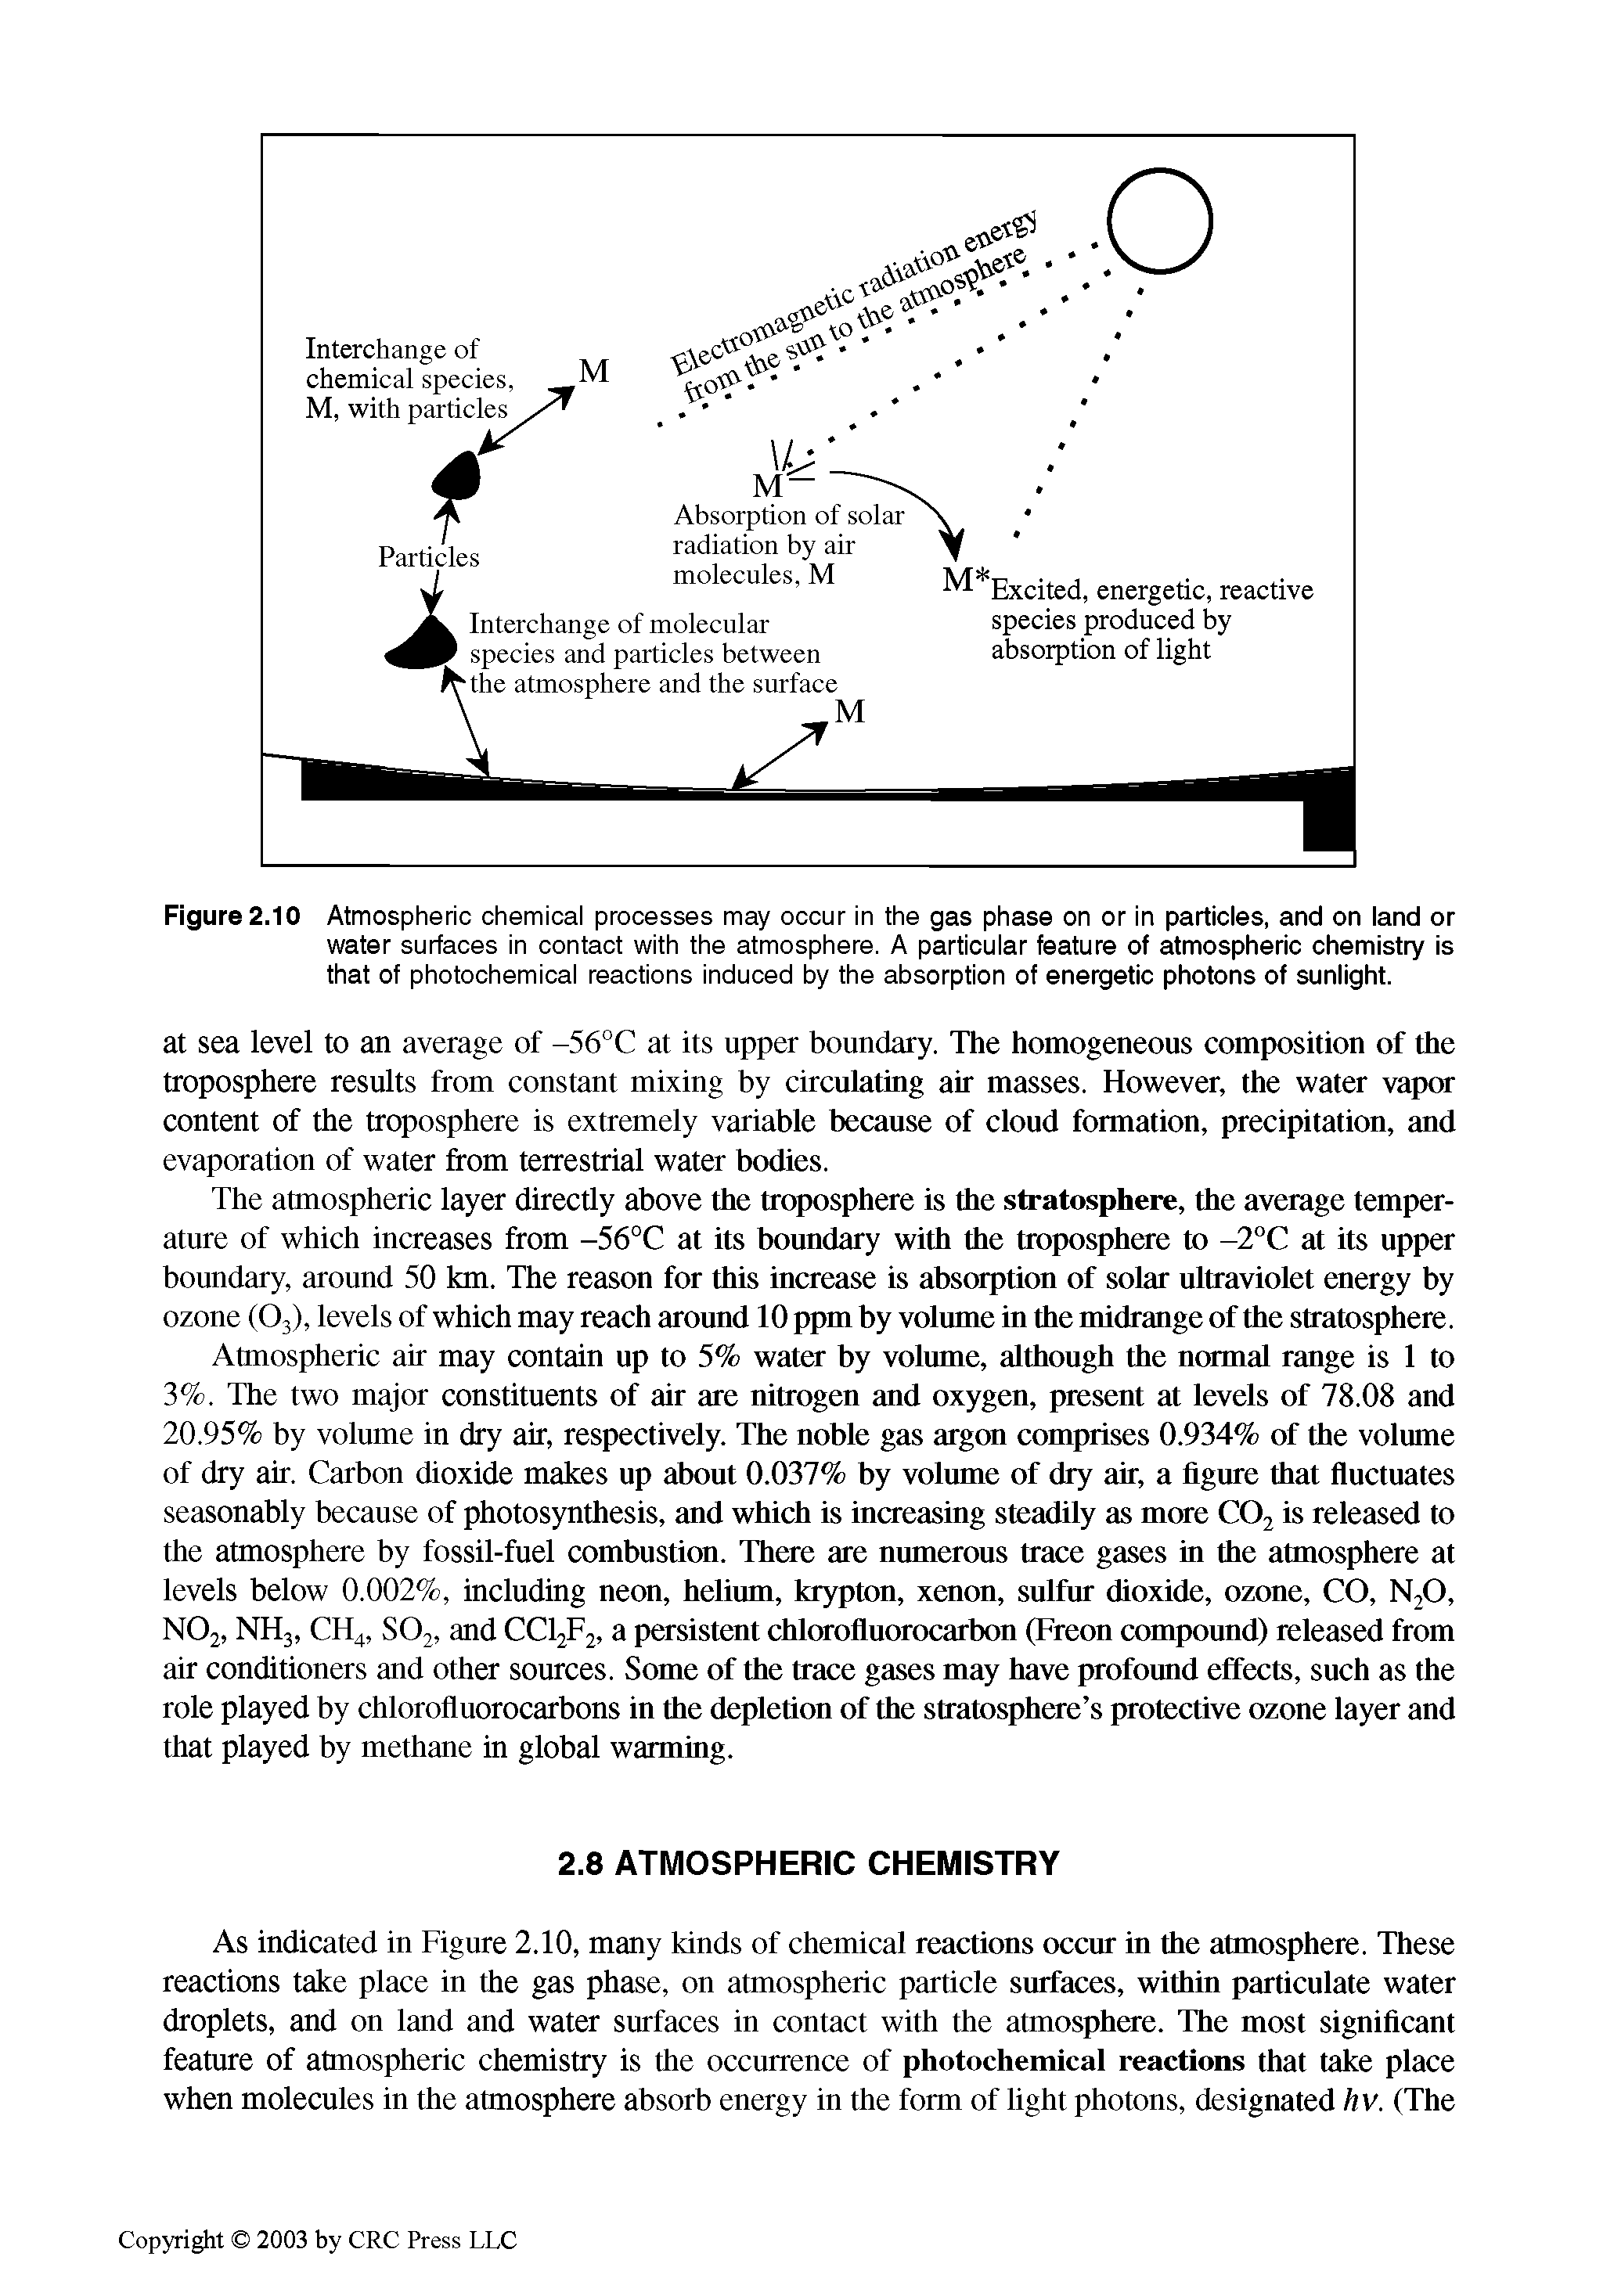 Figure 2.10 Atmospheric chemical processes may occur in the gas phase on or in particles, and on land or water surfaces in contact with the atmosphere. A particular feature of atmospheric chemistry is that of photochemical reactions induced by the absorption of energetic photons of sunlight.